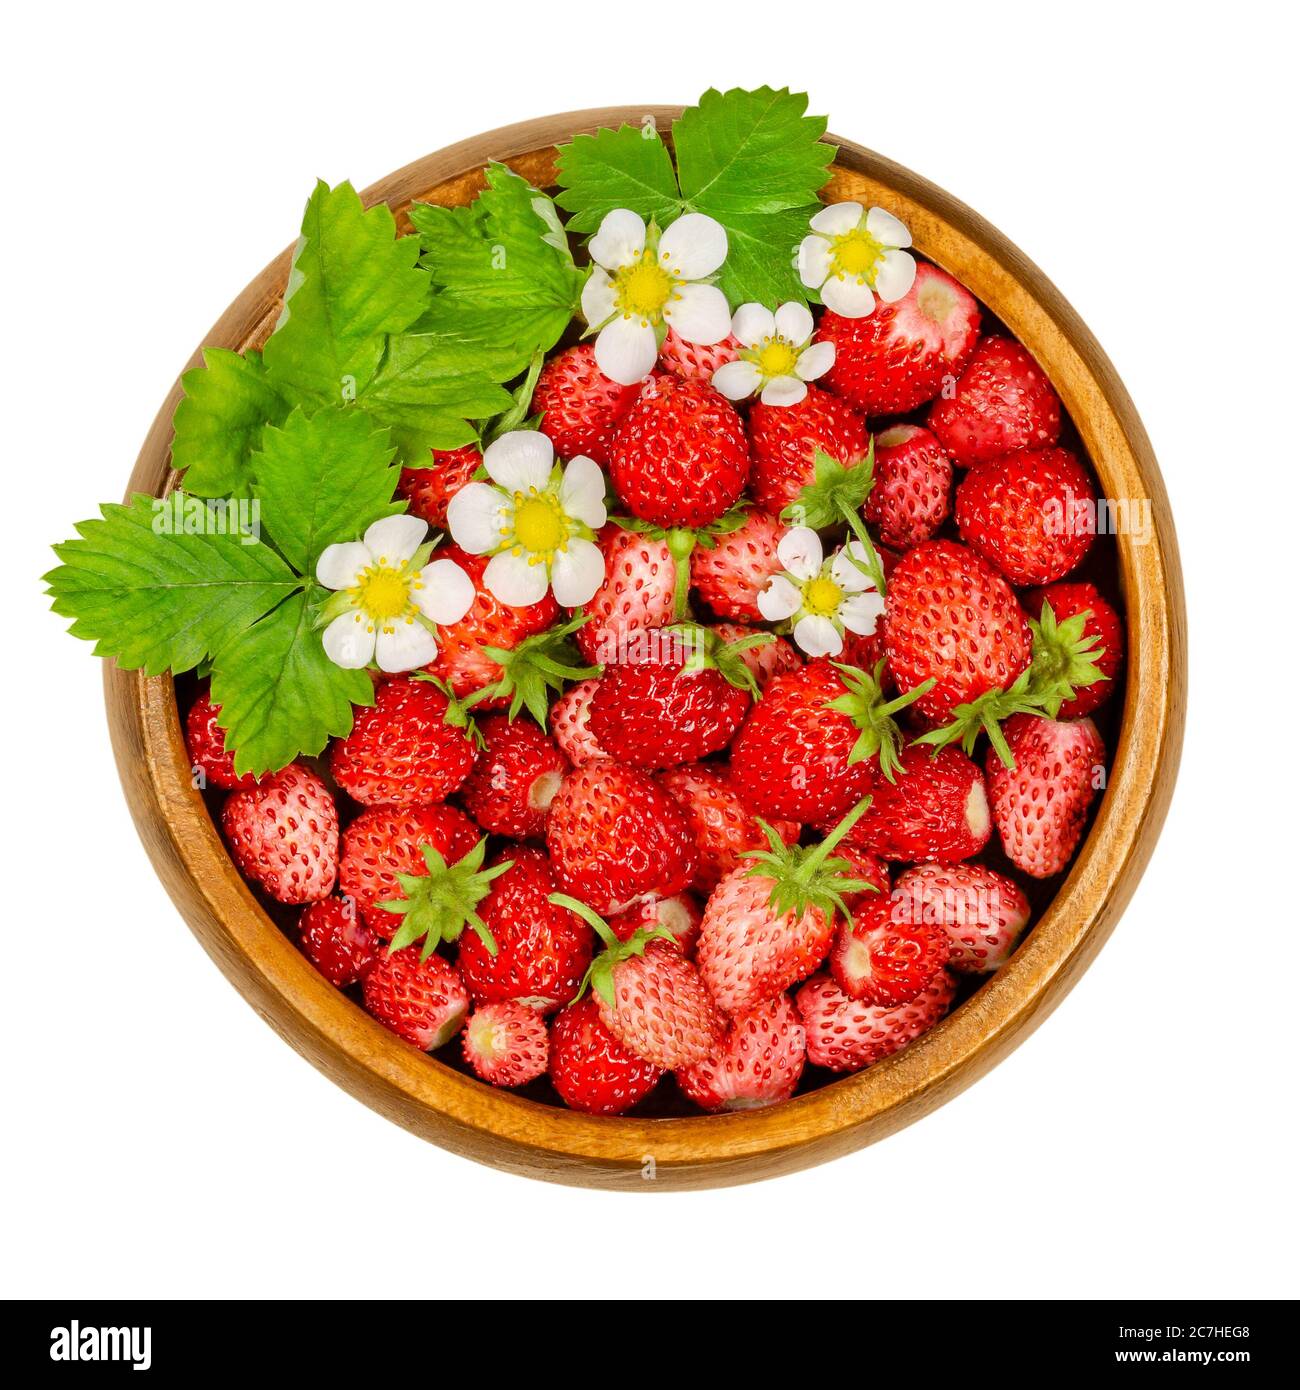 Wild strawberries in wooden bowl. Small ripe Alpine strawberries, also woodland, Carpathian or European strawberry, with leaves and flowers. Stock Photo